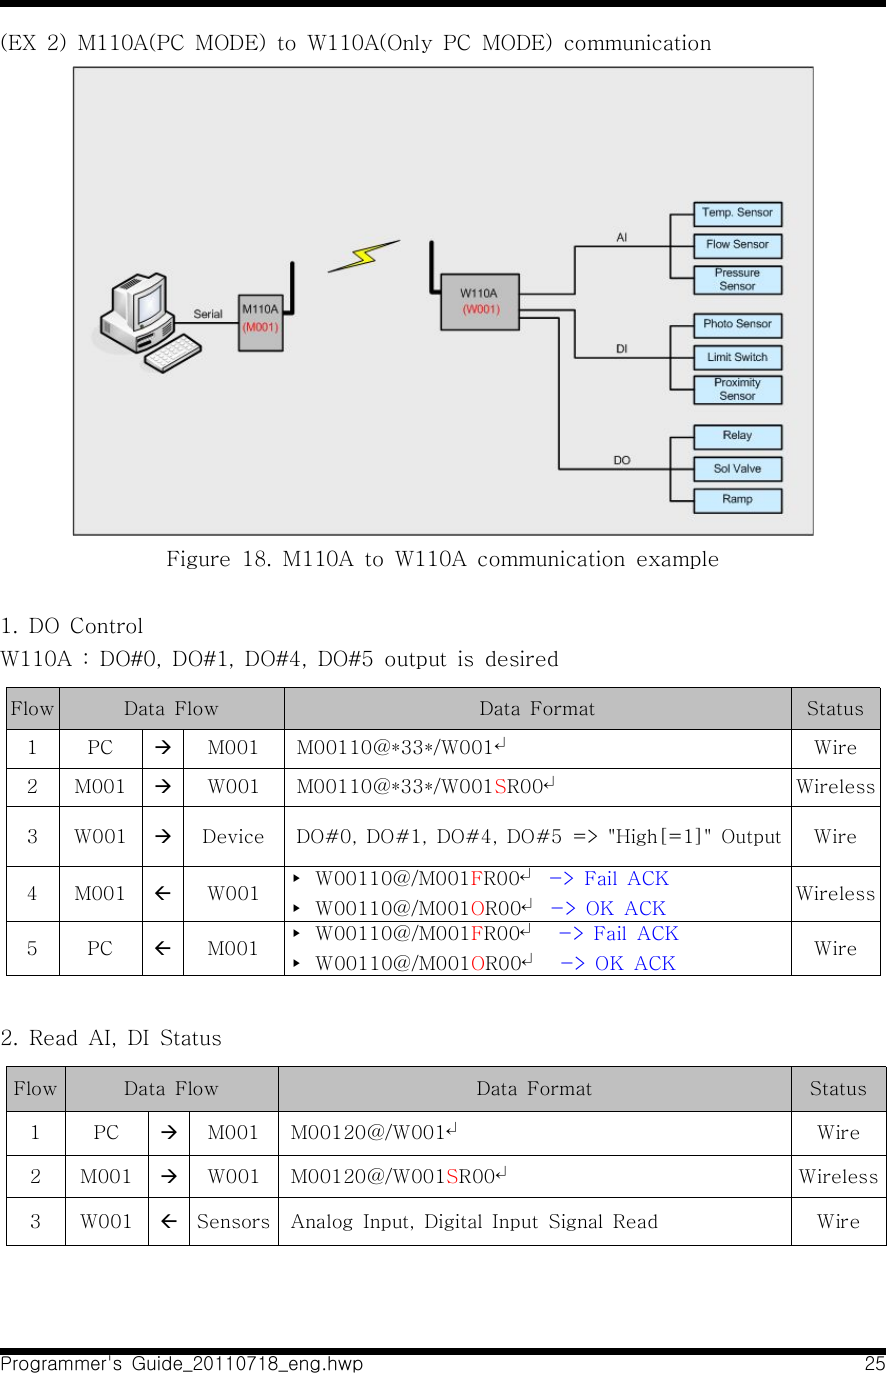 Programmer&apos;s  Guide_20110718_eng.hwp 25(EX  2)  M110A(PC  MODE)  to  W110A(Only  PC  MODE)  communication Figure  18.  M110A  to  W110A  communication  example1.  DO  ControlW110A  :  DO#0,  DO#1,  DO#4,  DO#5  output  is  desiredFlow Data  Flow Data  Format Status1 PC àM001   M00110@*33*/W001↵Wire2 M001 àW001   M00110@*33*/W001SR00↵Wireless3 W001 àDevice   DO#0,  DO#1,  DO#4,  DO#5  =&gt;  &quot;High[=1]&quot;  Output Wire4 M001 ßW001 ▸  W00110@/M001FR00↵  -&gt;  Fail  ACK▸  W00110@/M001OR00↵  -&gt;  OK  ACK Wireless5 PC ßM001 ▸  W00110@/M001FR00↵    -&gt;  Fail  ACK ▸  W00110@/M001OR00↵    -&gt;  OK  ACK Wire2.  Read  AI,  DI  StatusFlow Data  Flow Data  Format Status1 PC àM001   M00120@/W001↵Wire2 M001 àW001   M00120@/W001SR00↵Wireless3 W001 ßSensors   Analog  Input,  Digital  Input  Signal  Read Wire